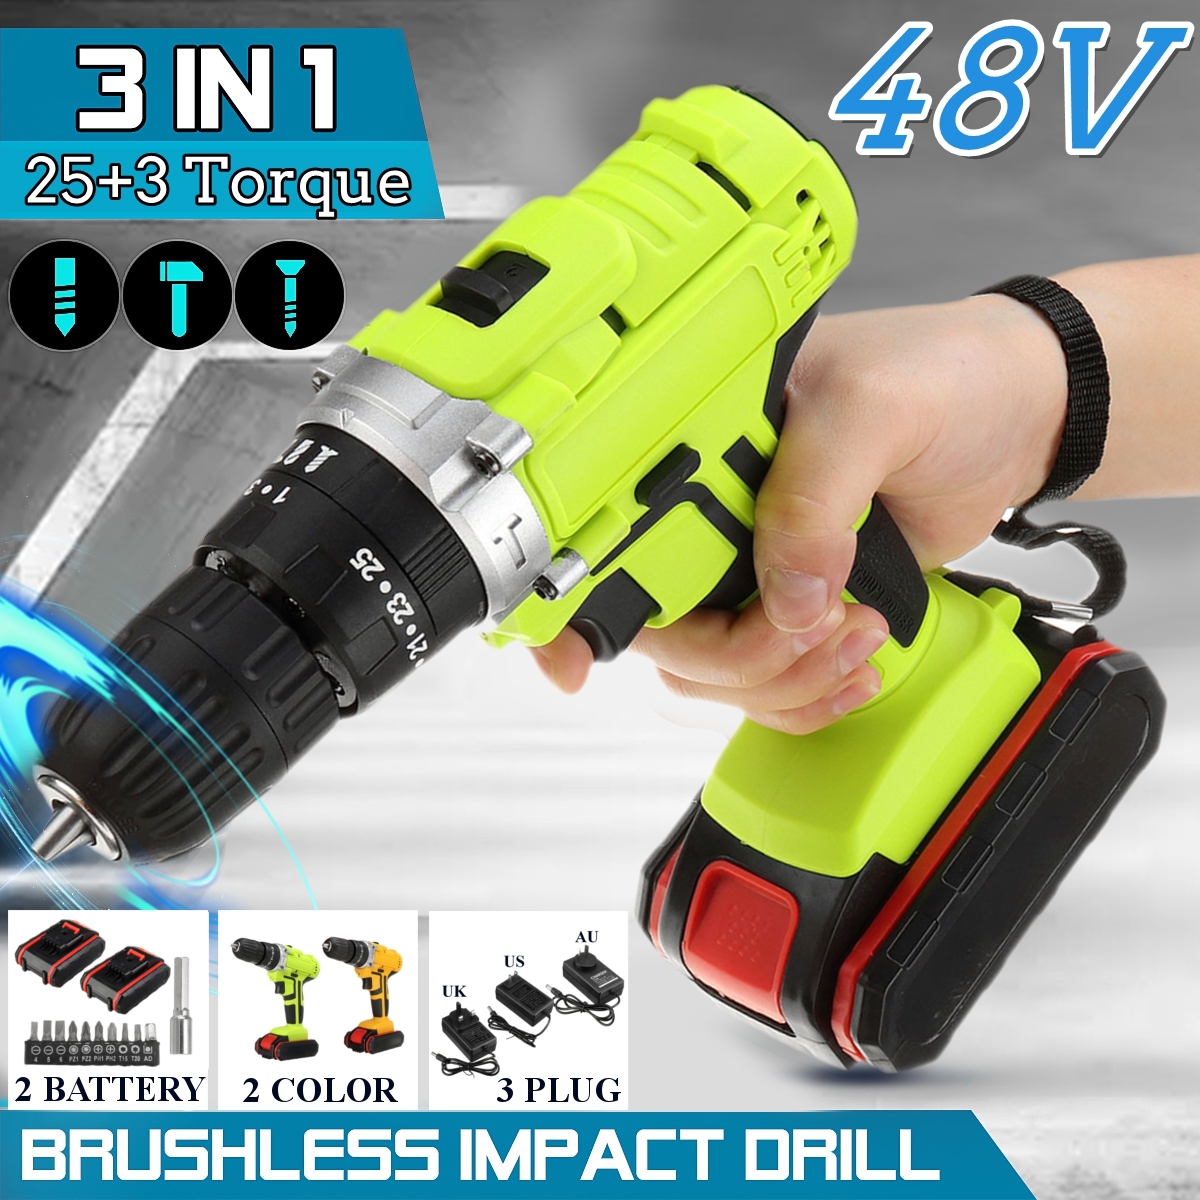 48VF-22800mAh-Cordless-Rechargable-3-In-1-Power-Drills-Impact-Electric-Drill-Driver-With-2Pcs-Batter-1877445-5